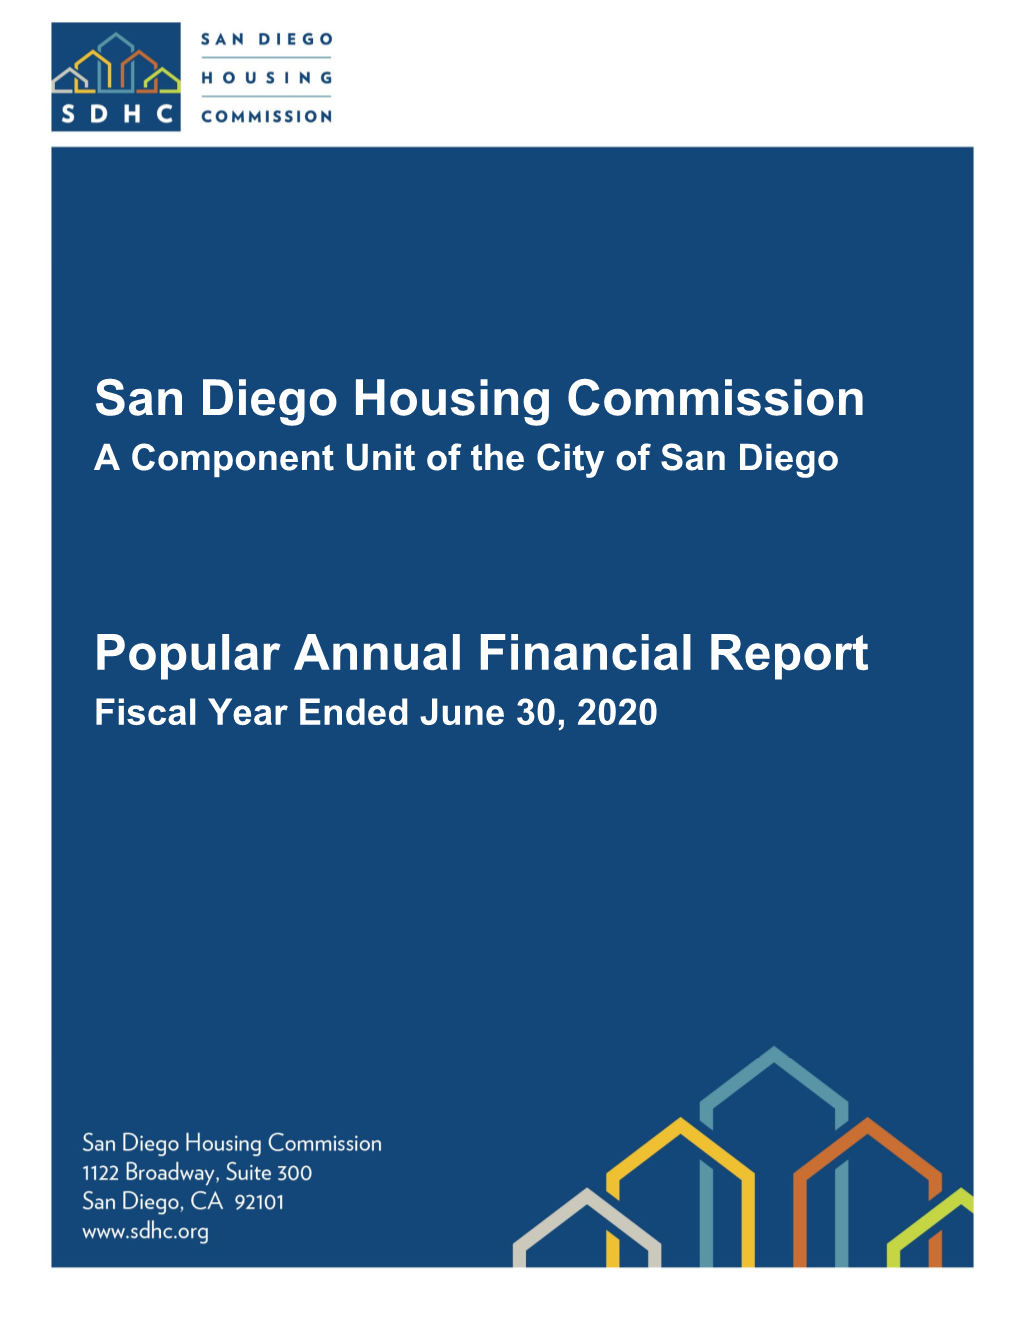 FY 2020 Popular Annual Financial Report San Diego Housing Commission 1